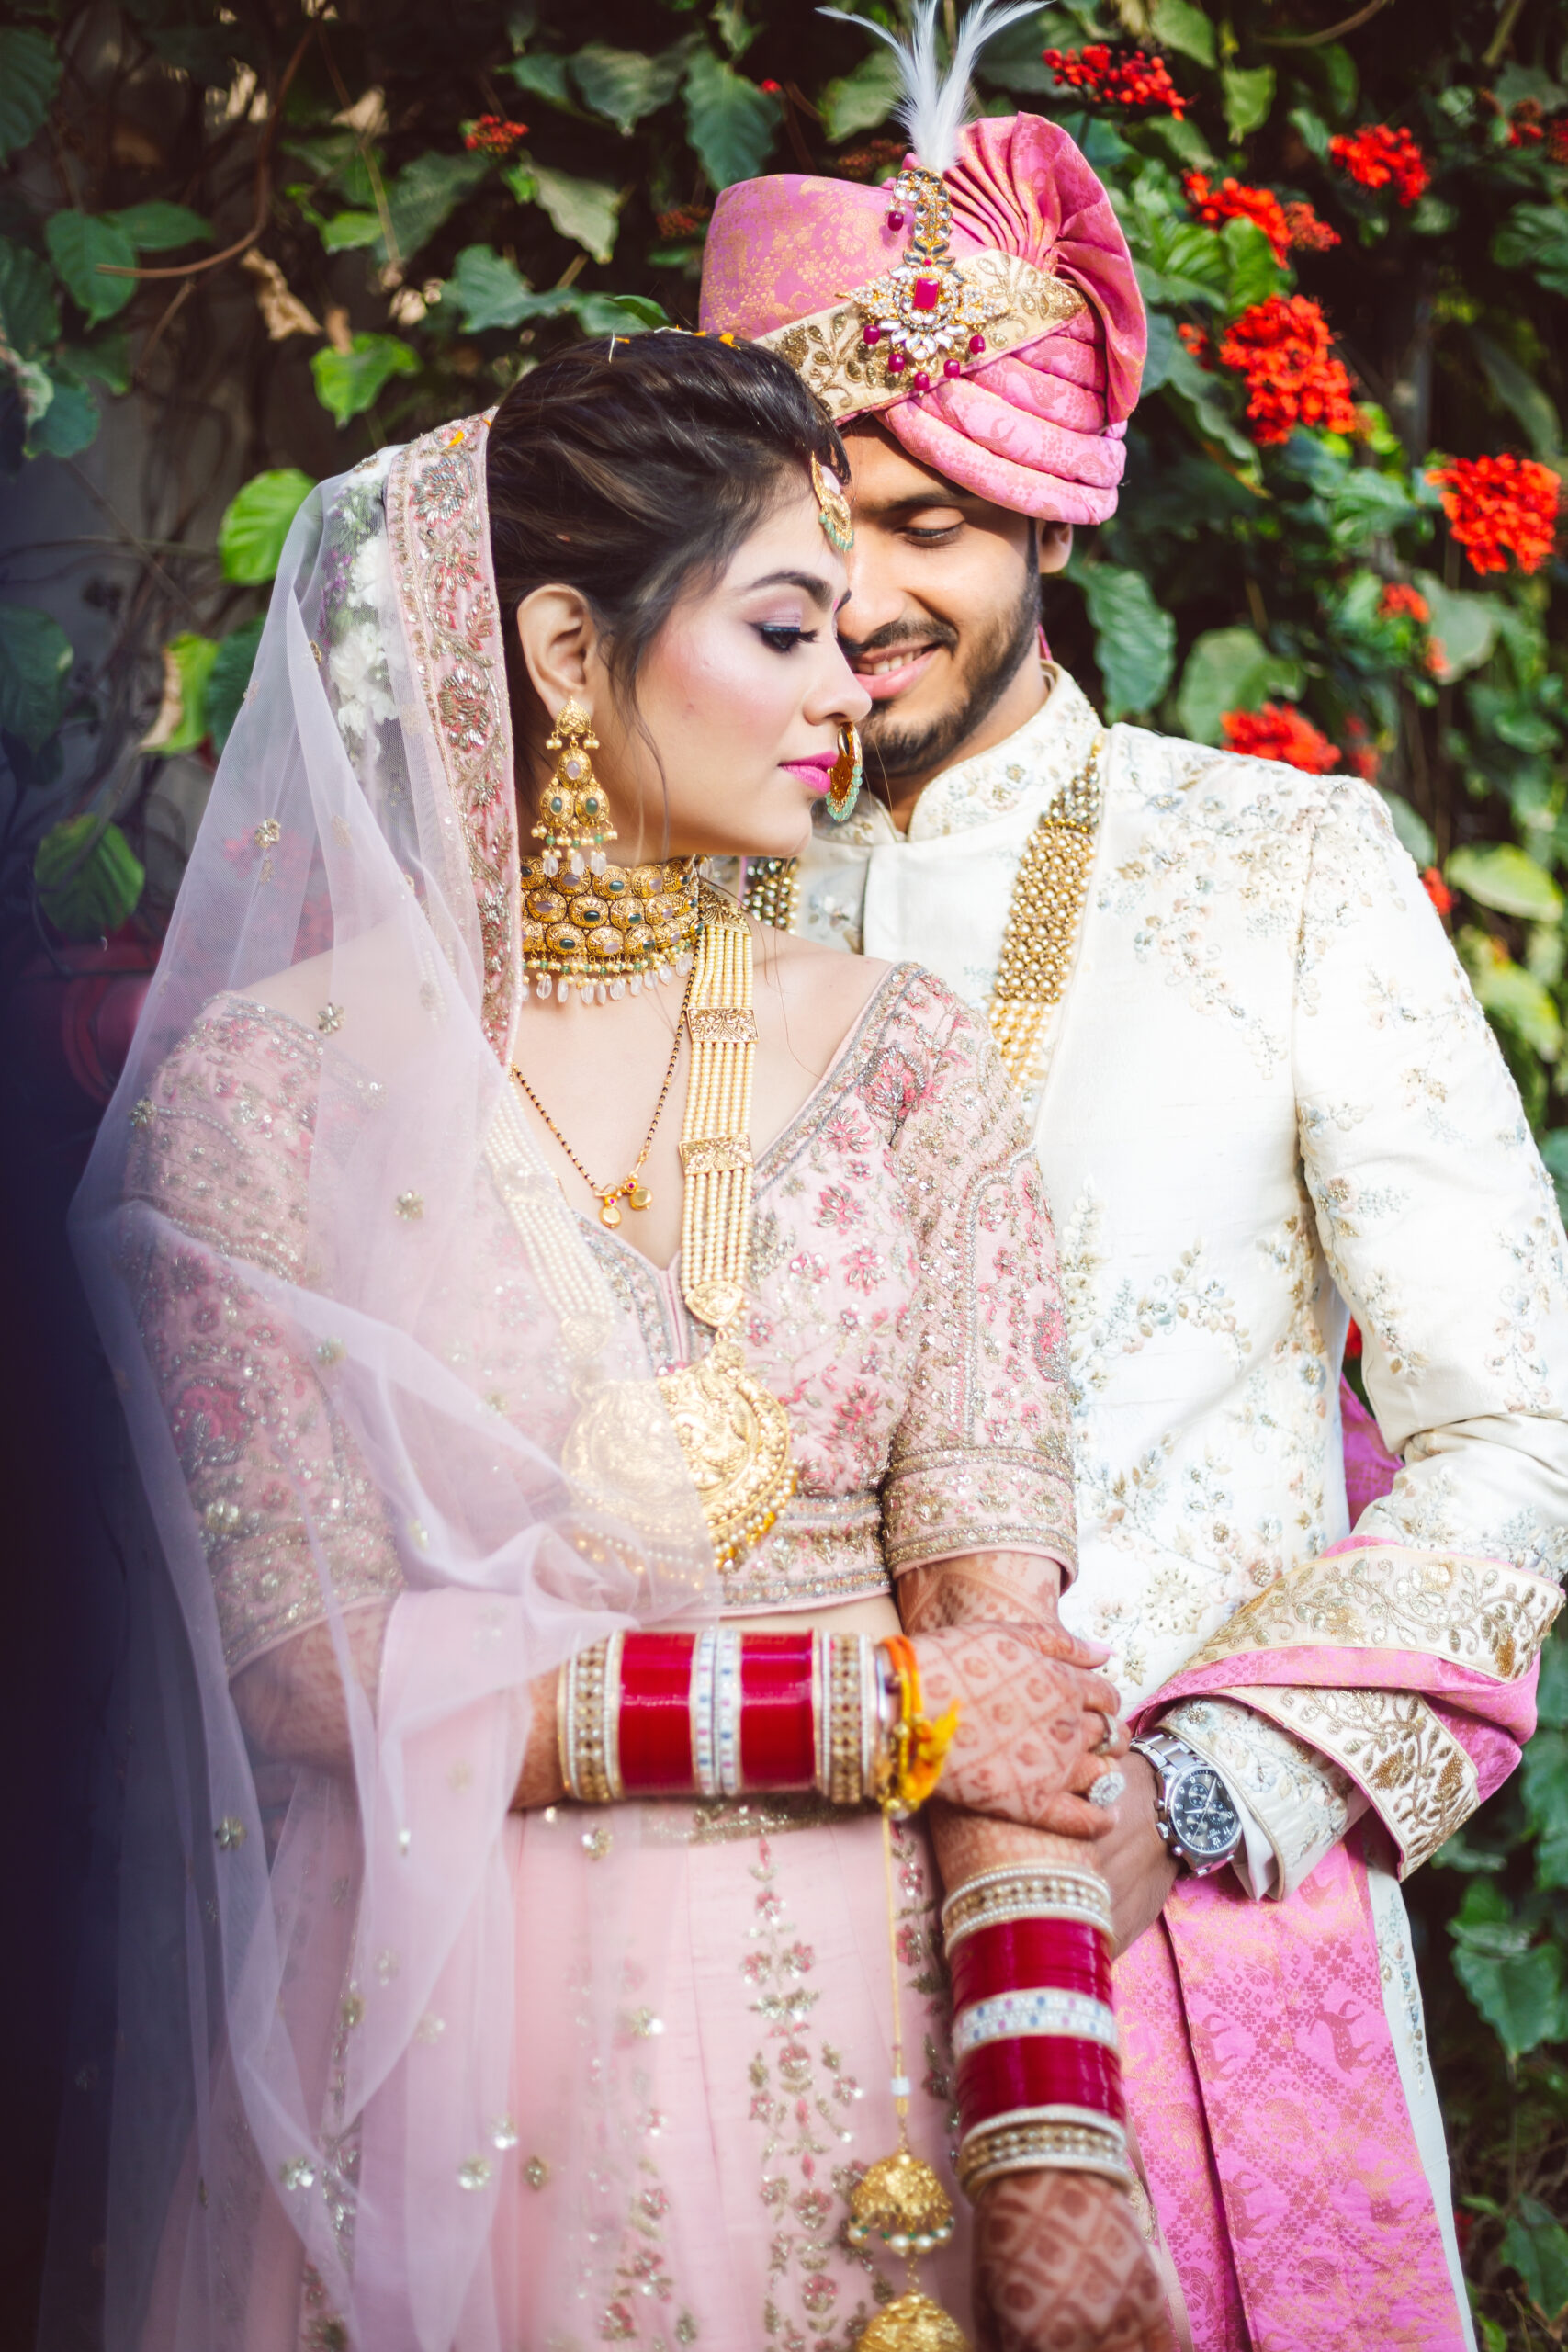 Red Veds: Captured Stunning New Indian Wedding Couple Poses